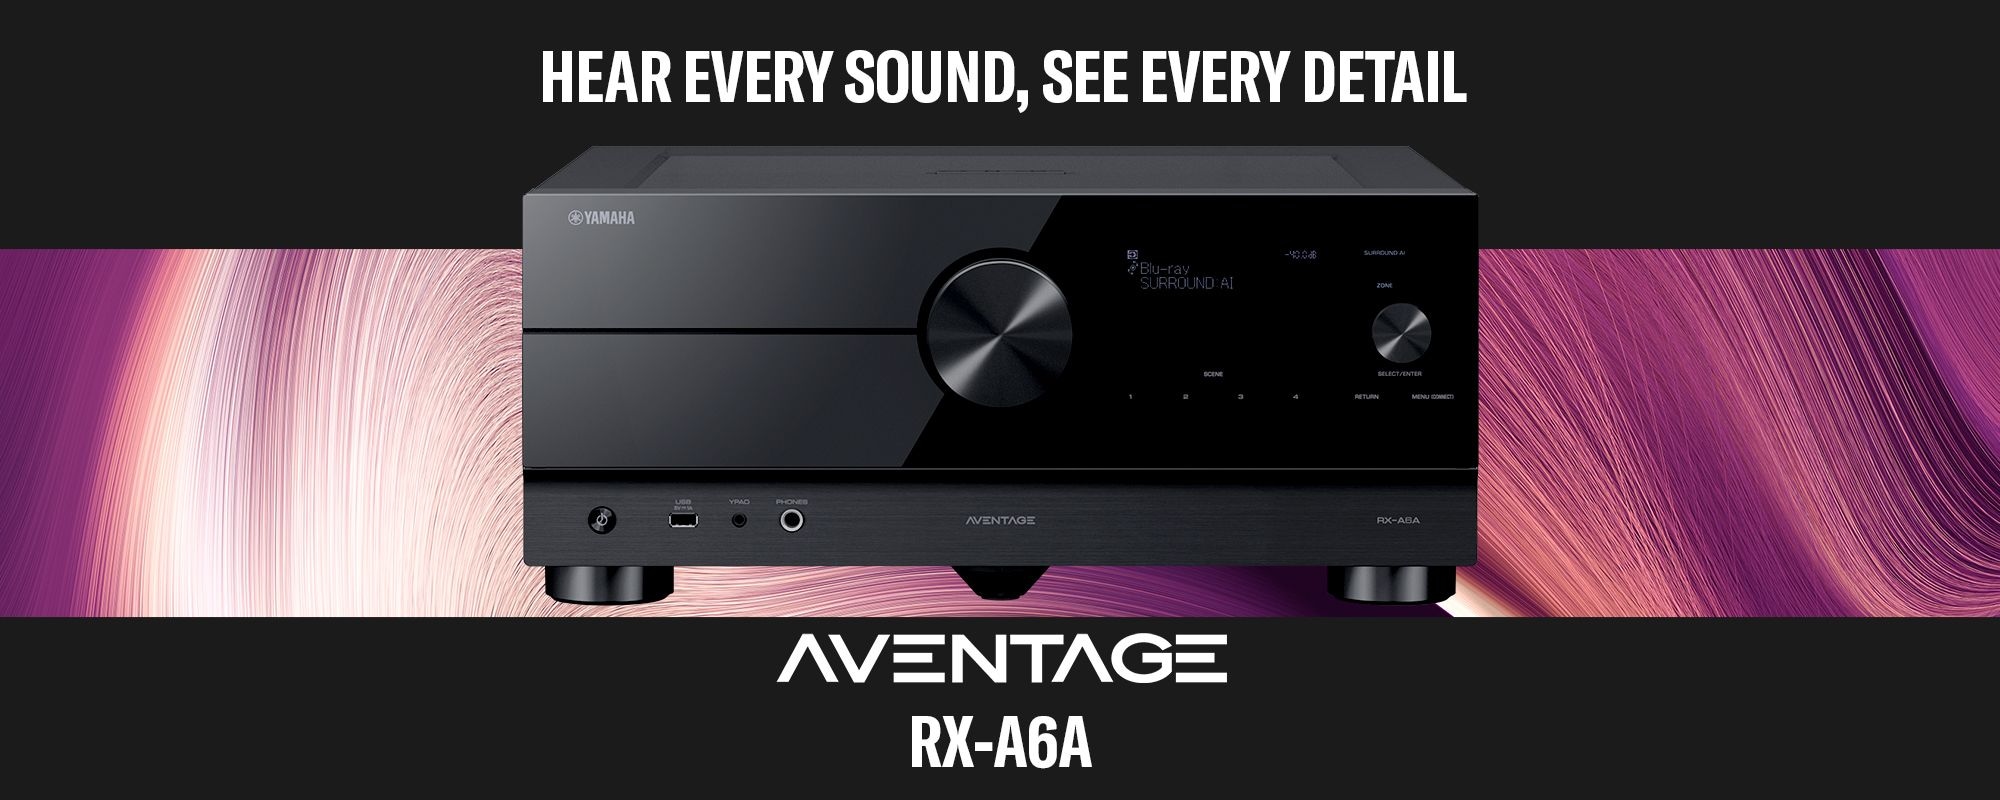 Hear Every Sound, See Every Detail - Yamaha AVENTAGE RX-A6A 9.2-Channel AV Receiver with 8K HDMI and MusicCast Header - Desktop